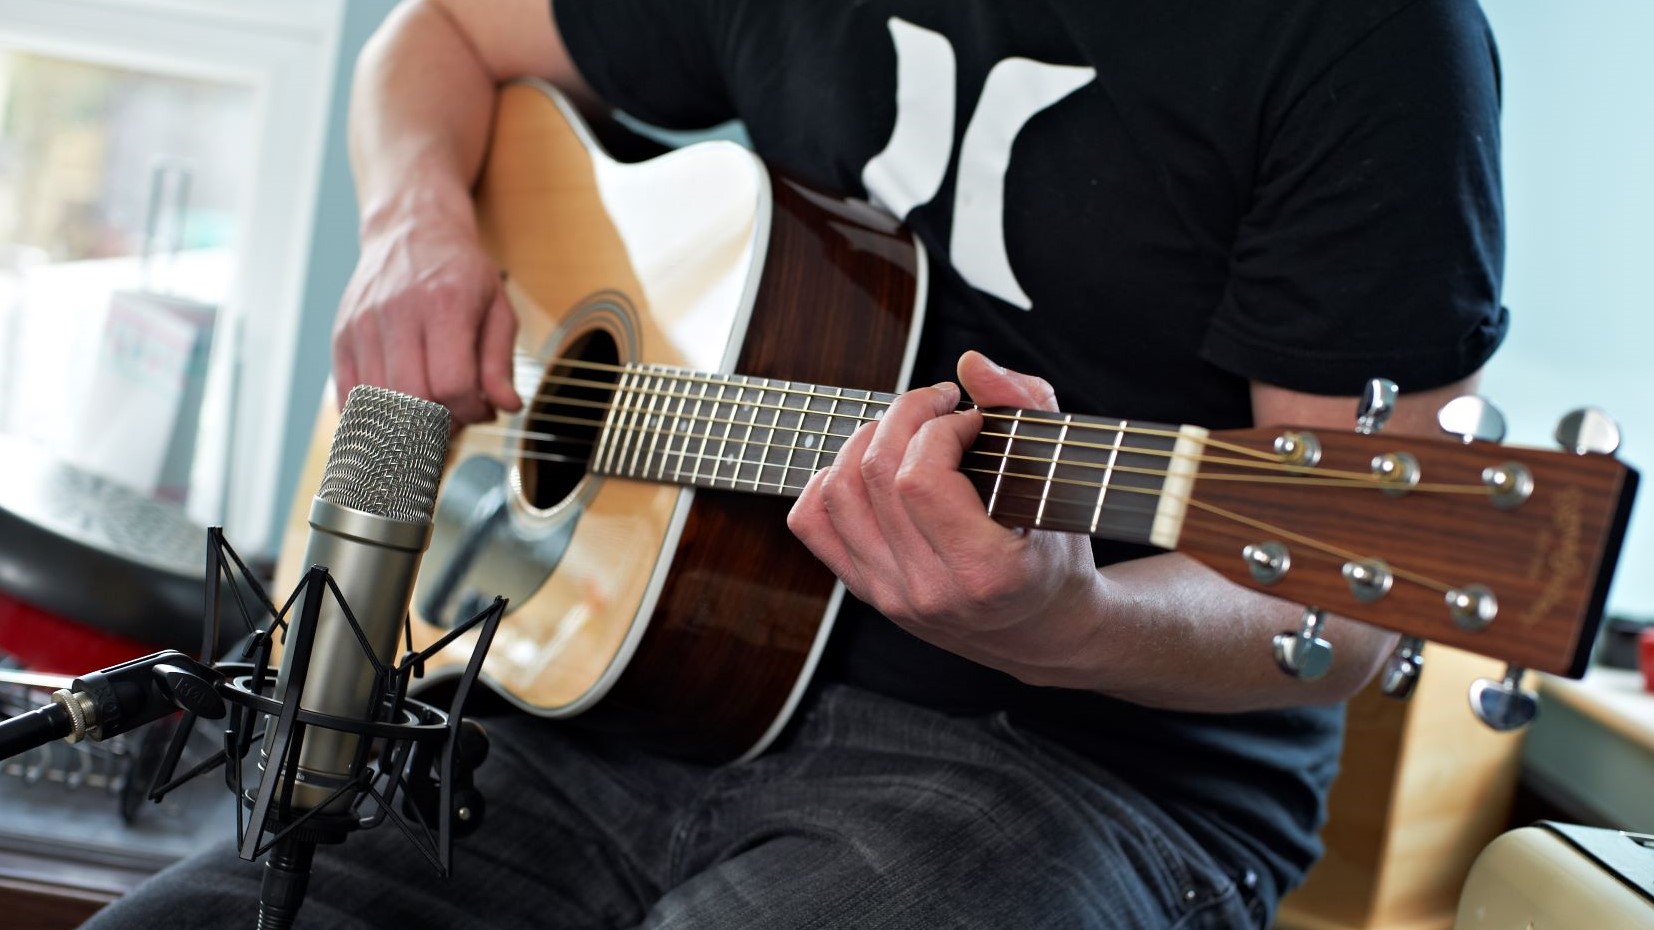 How To Set Up An Acoustic Guitar